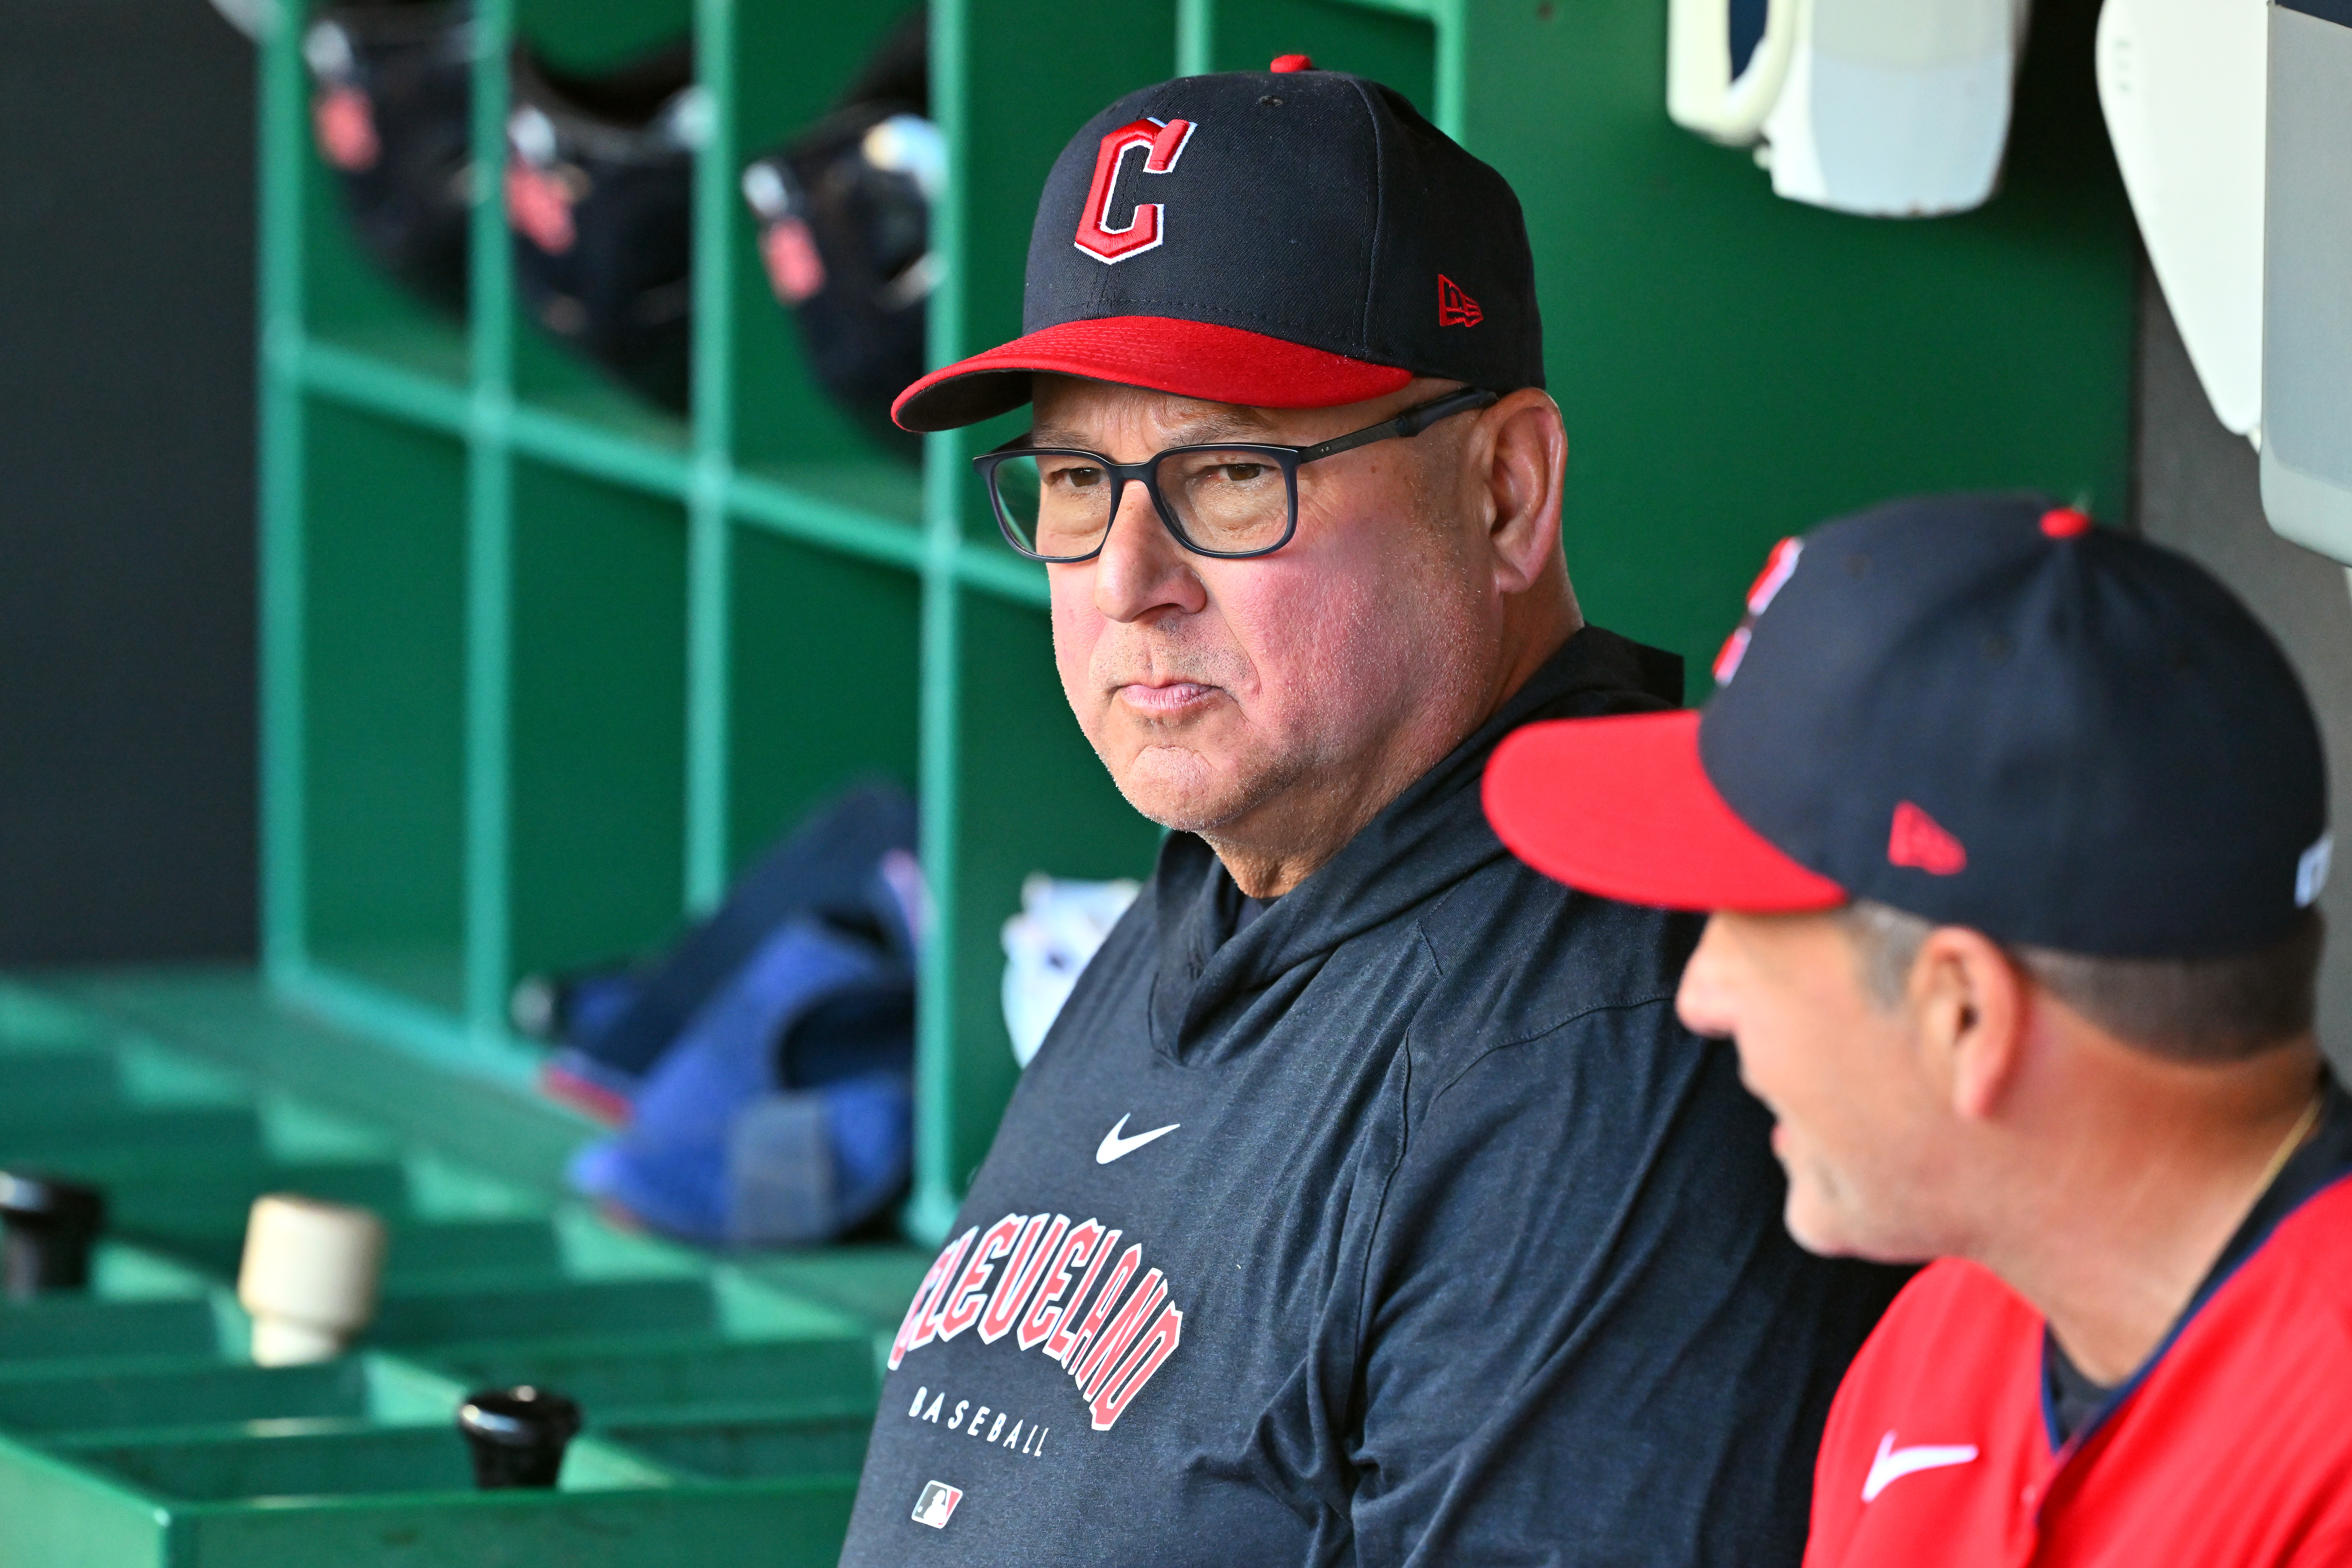 Beloved former Red Sox manager Terry Francona readies for final game